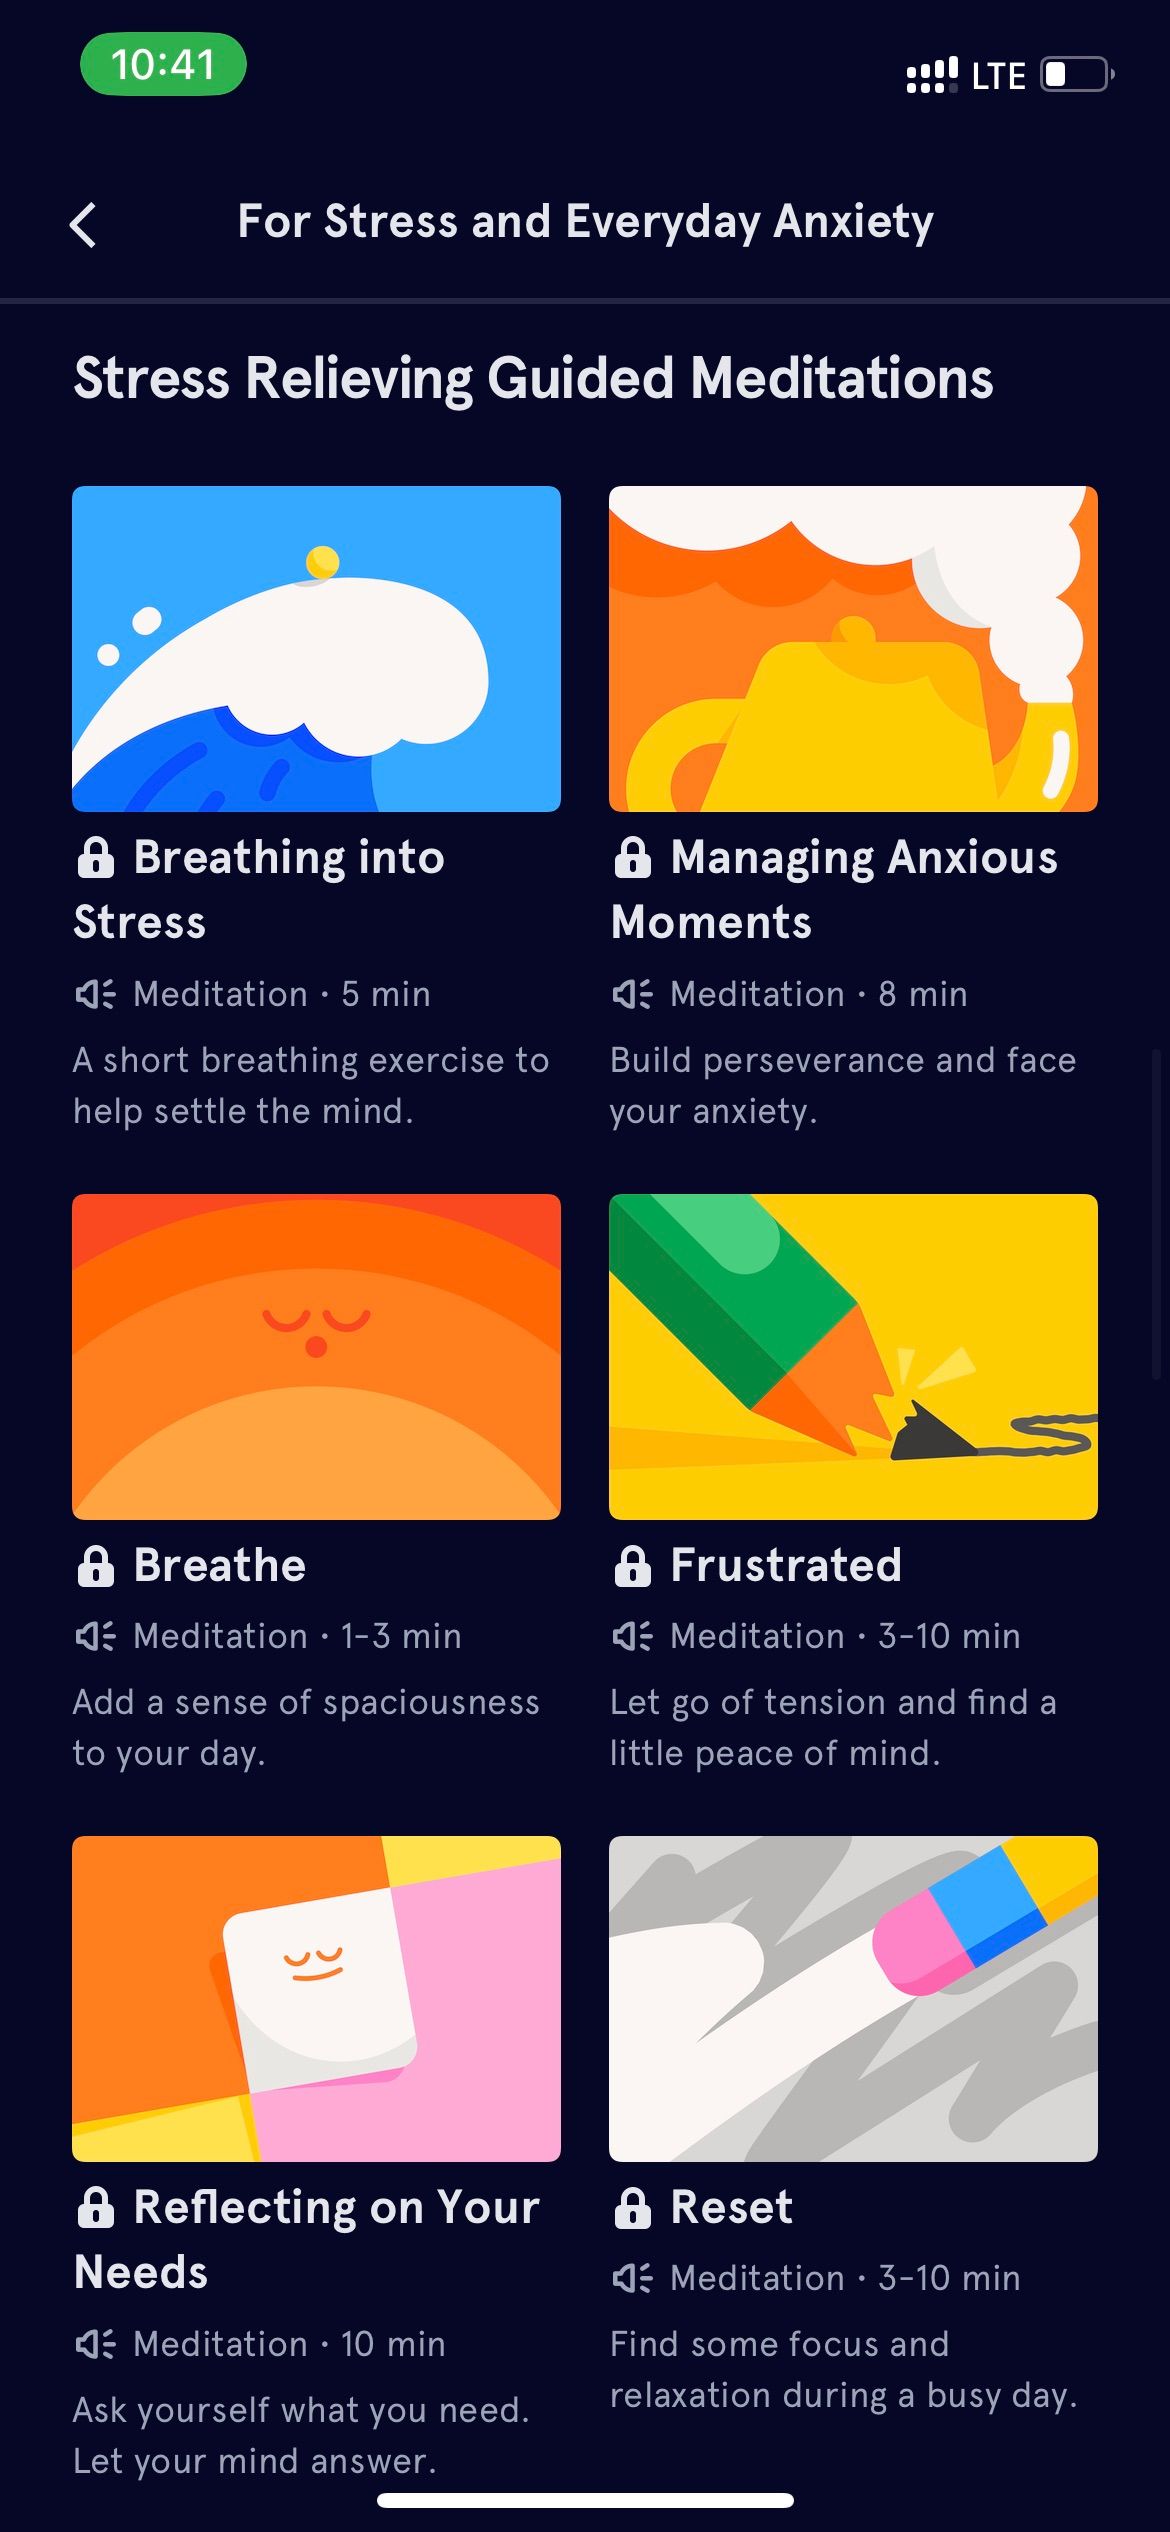 Headspace "For Everyday Stress and Anxiety" page